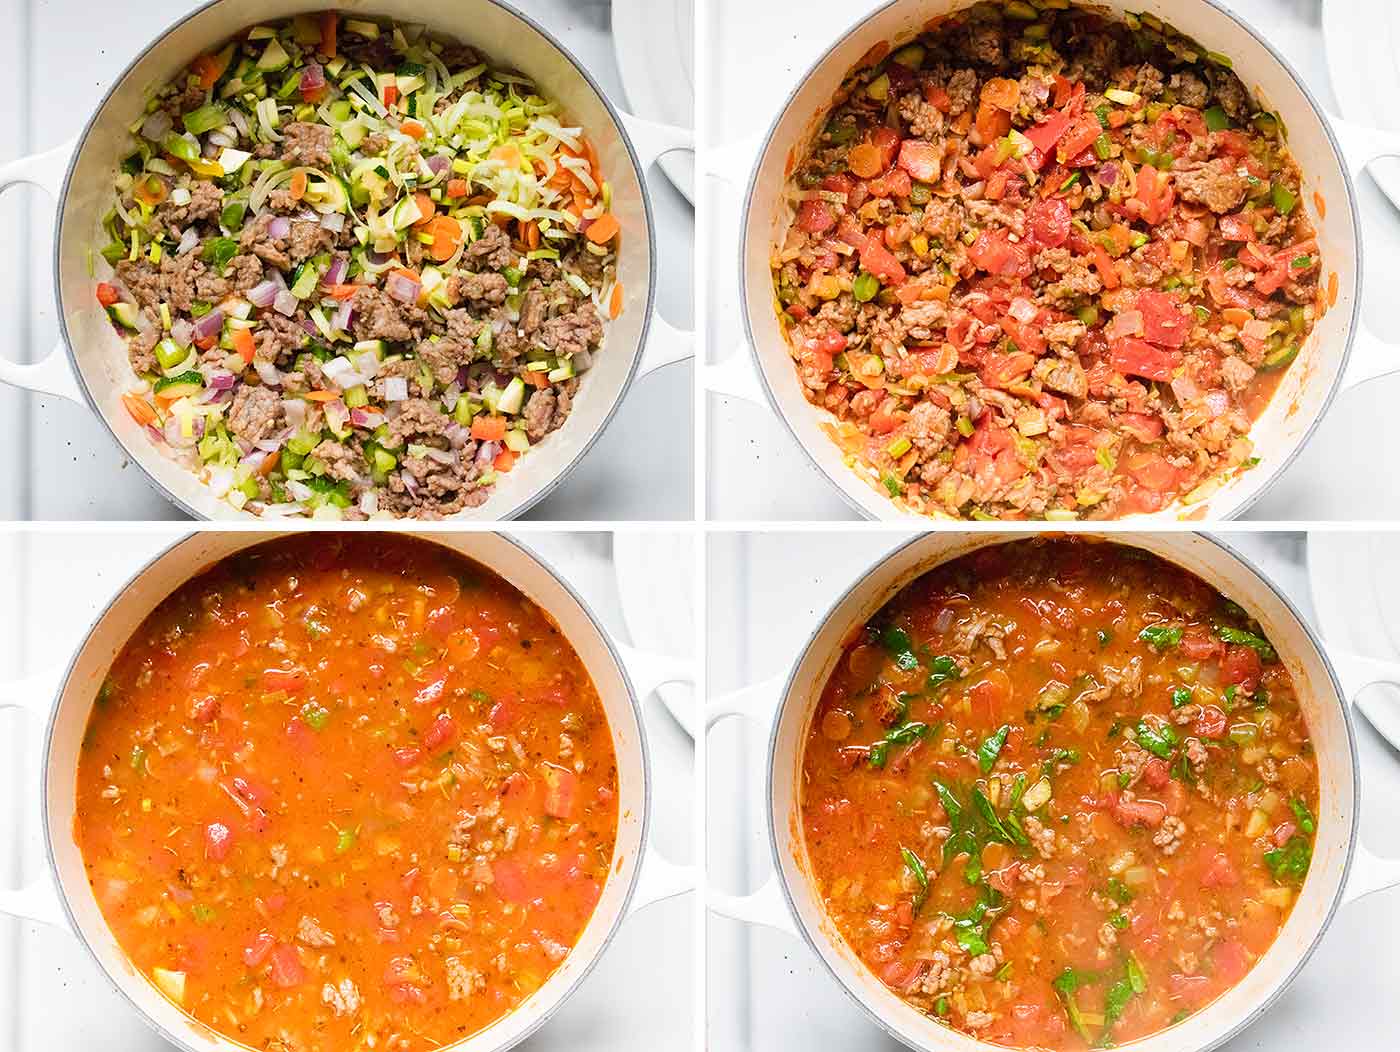 Steps for making Italian Sausage Orzo Soup